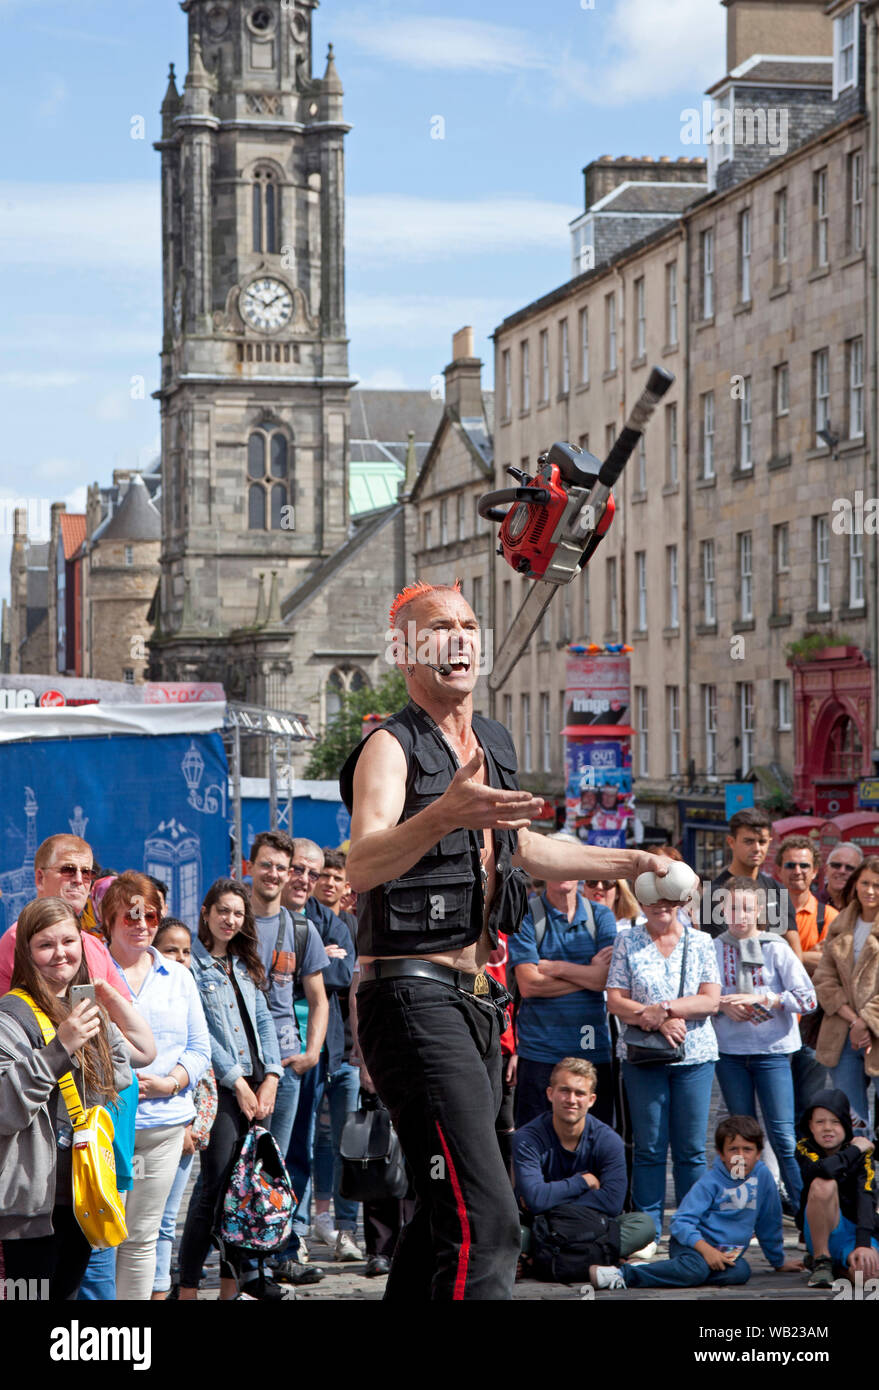 Royal Mile, Edinburgh, Scotland, UK. 23rd August 2019. The Mighty Gareth in his 32nd year at the Fringe entertains the audience with juggling a chain saw, with the Tron Kirk in the background. Stock Photo